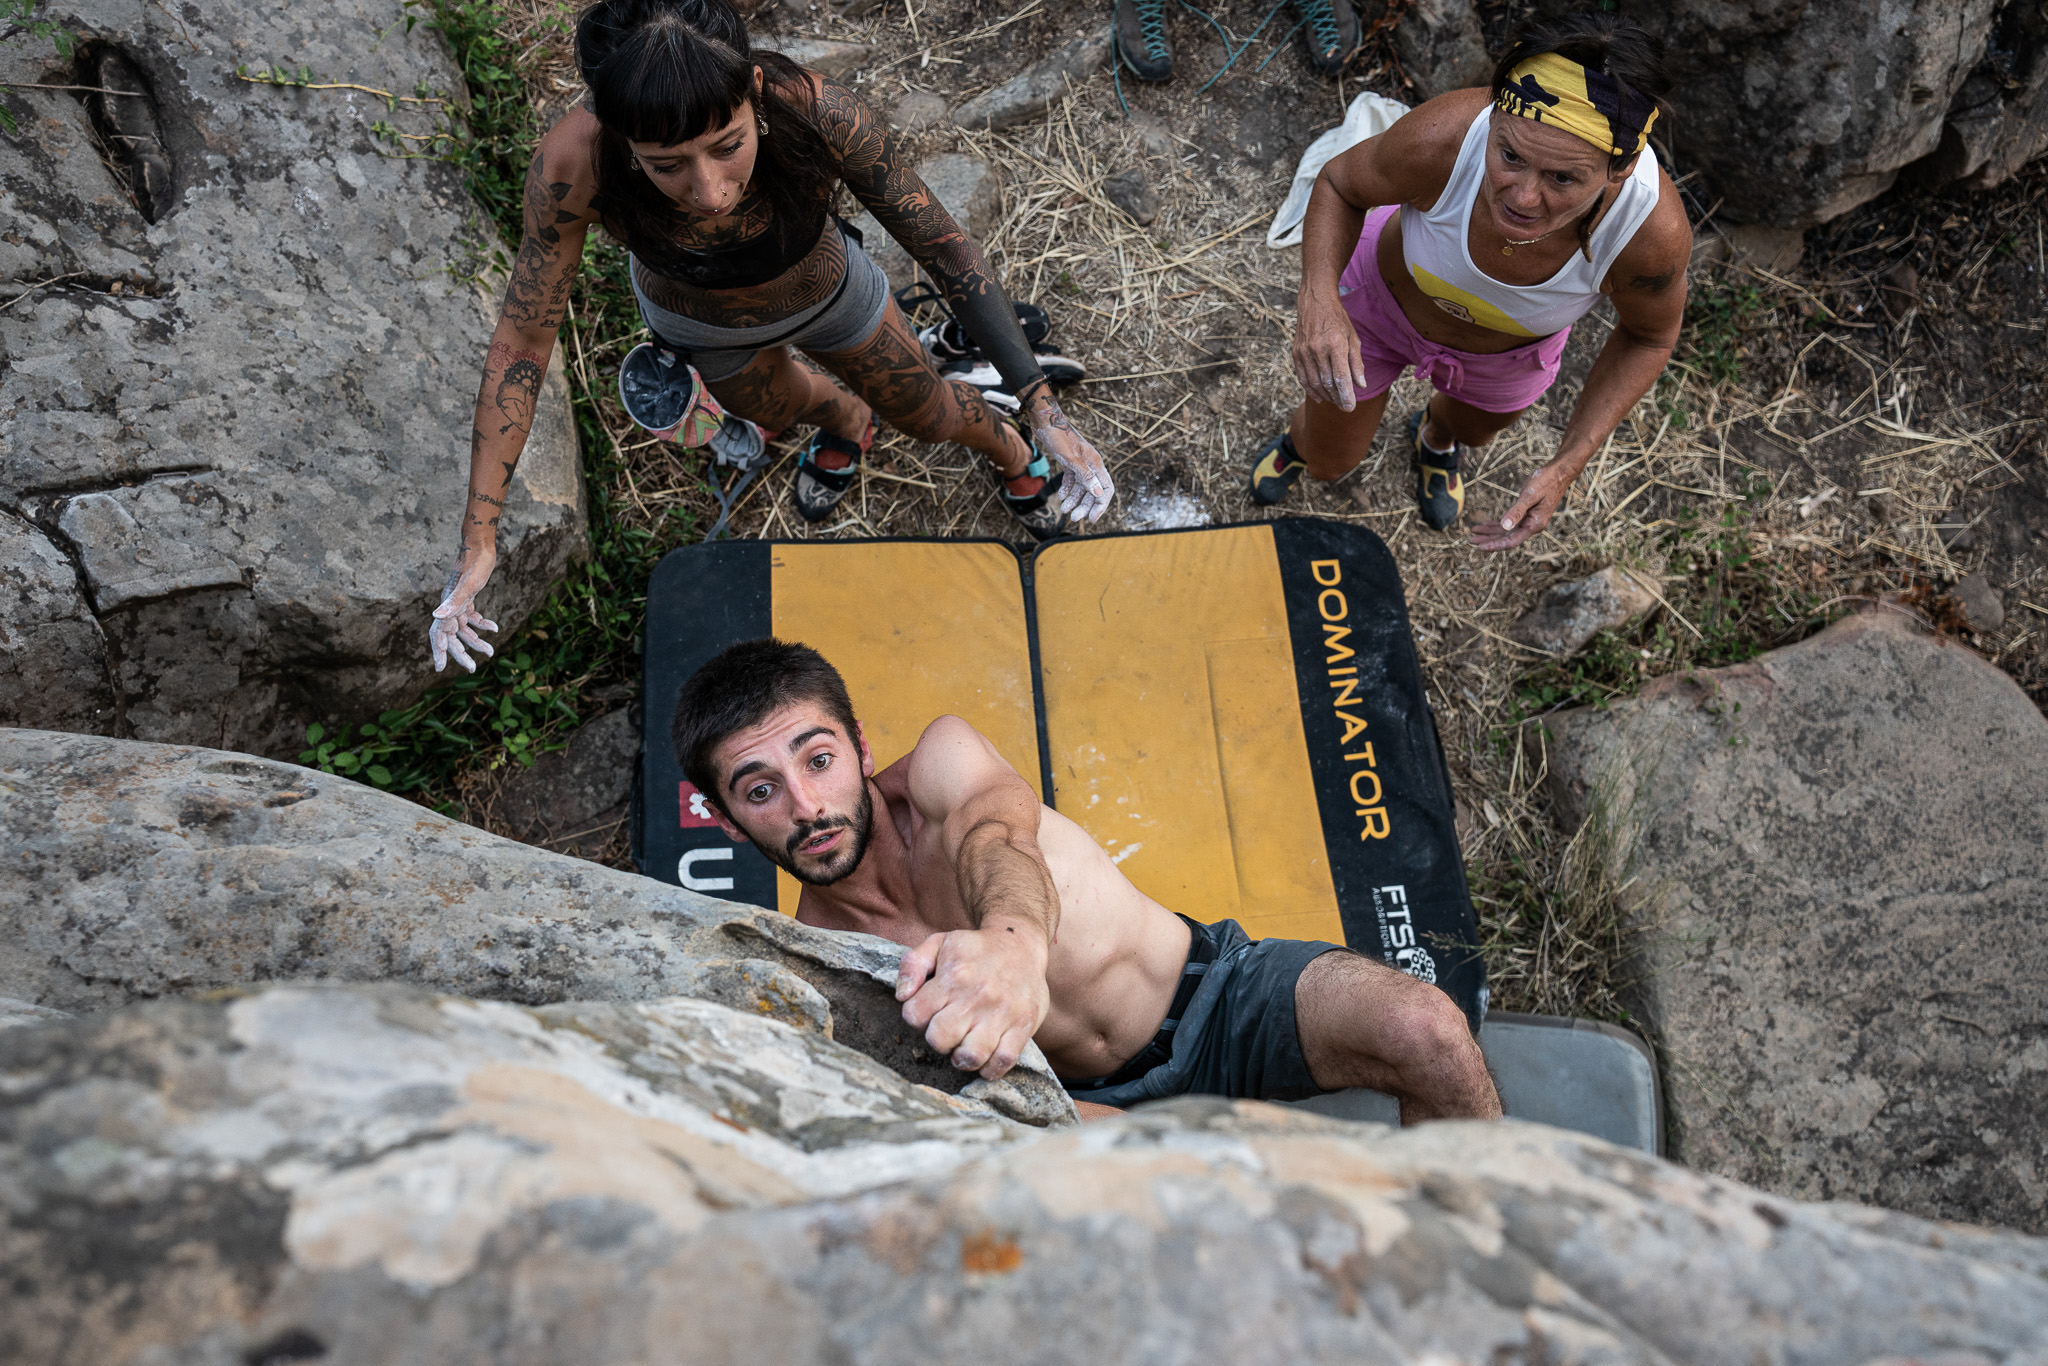 A group of rock climbers bouldering in Sicily